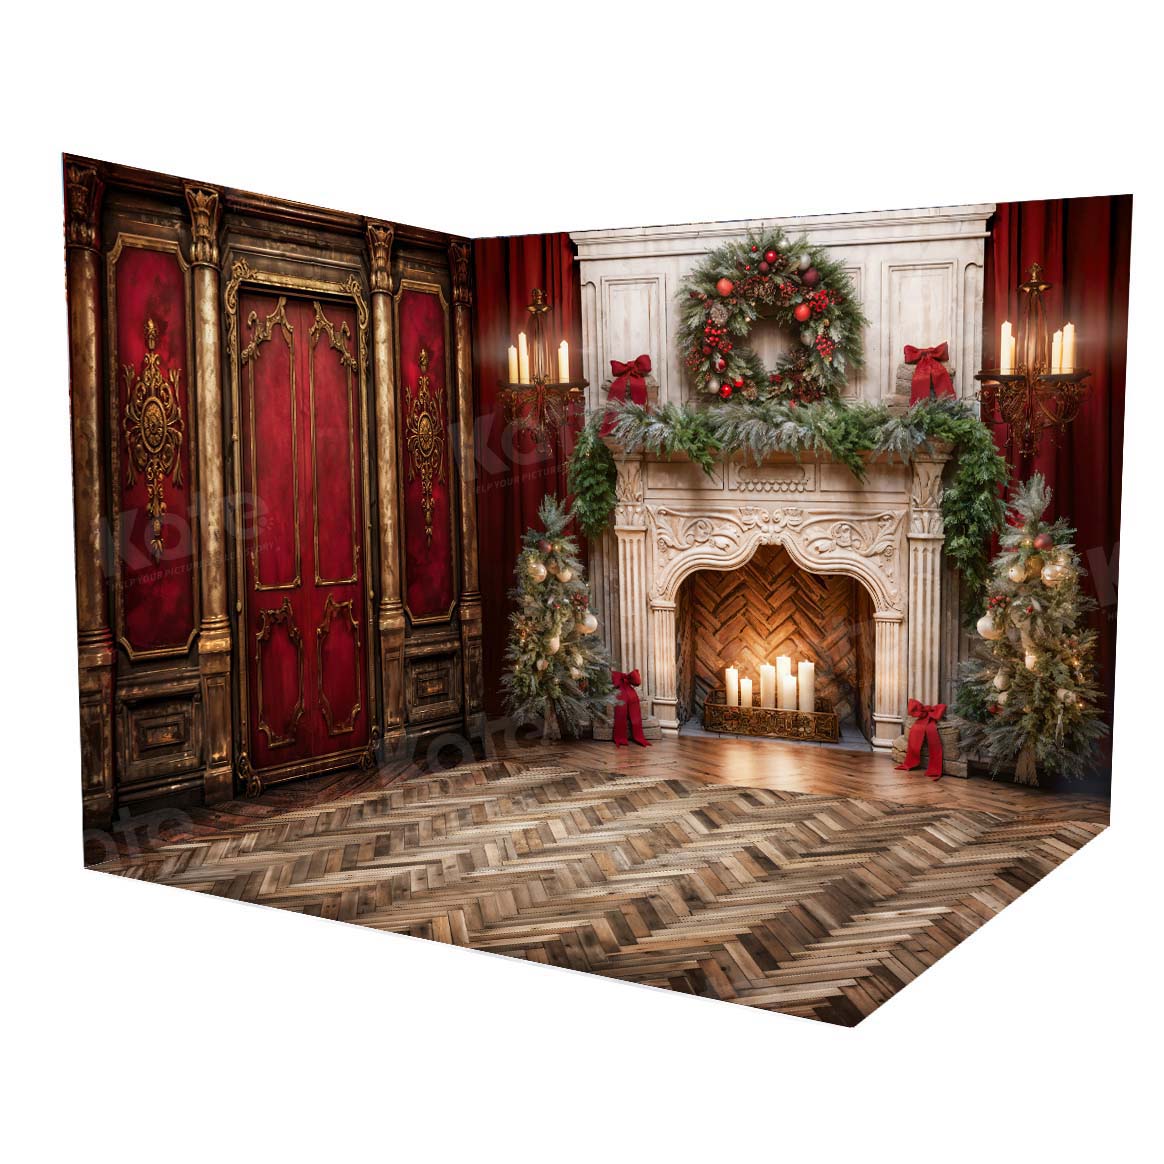 Kate Christmas Victorian Red Wall Fireplace Room Set